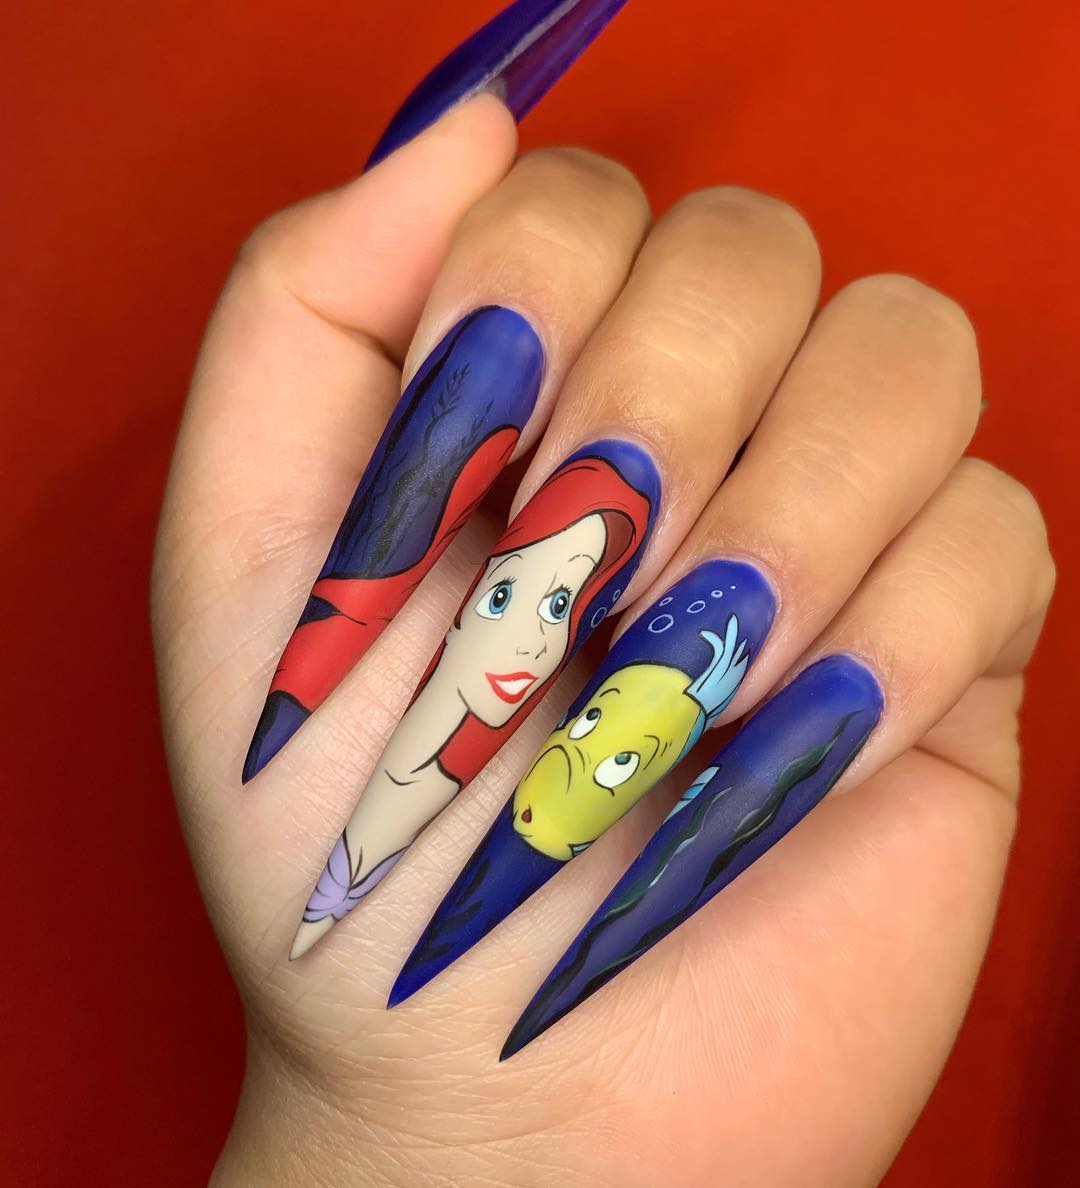 Freehand Nail Art Expert Paints Character-Themed Nails - MobiSpirit